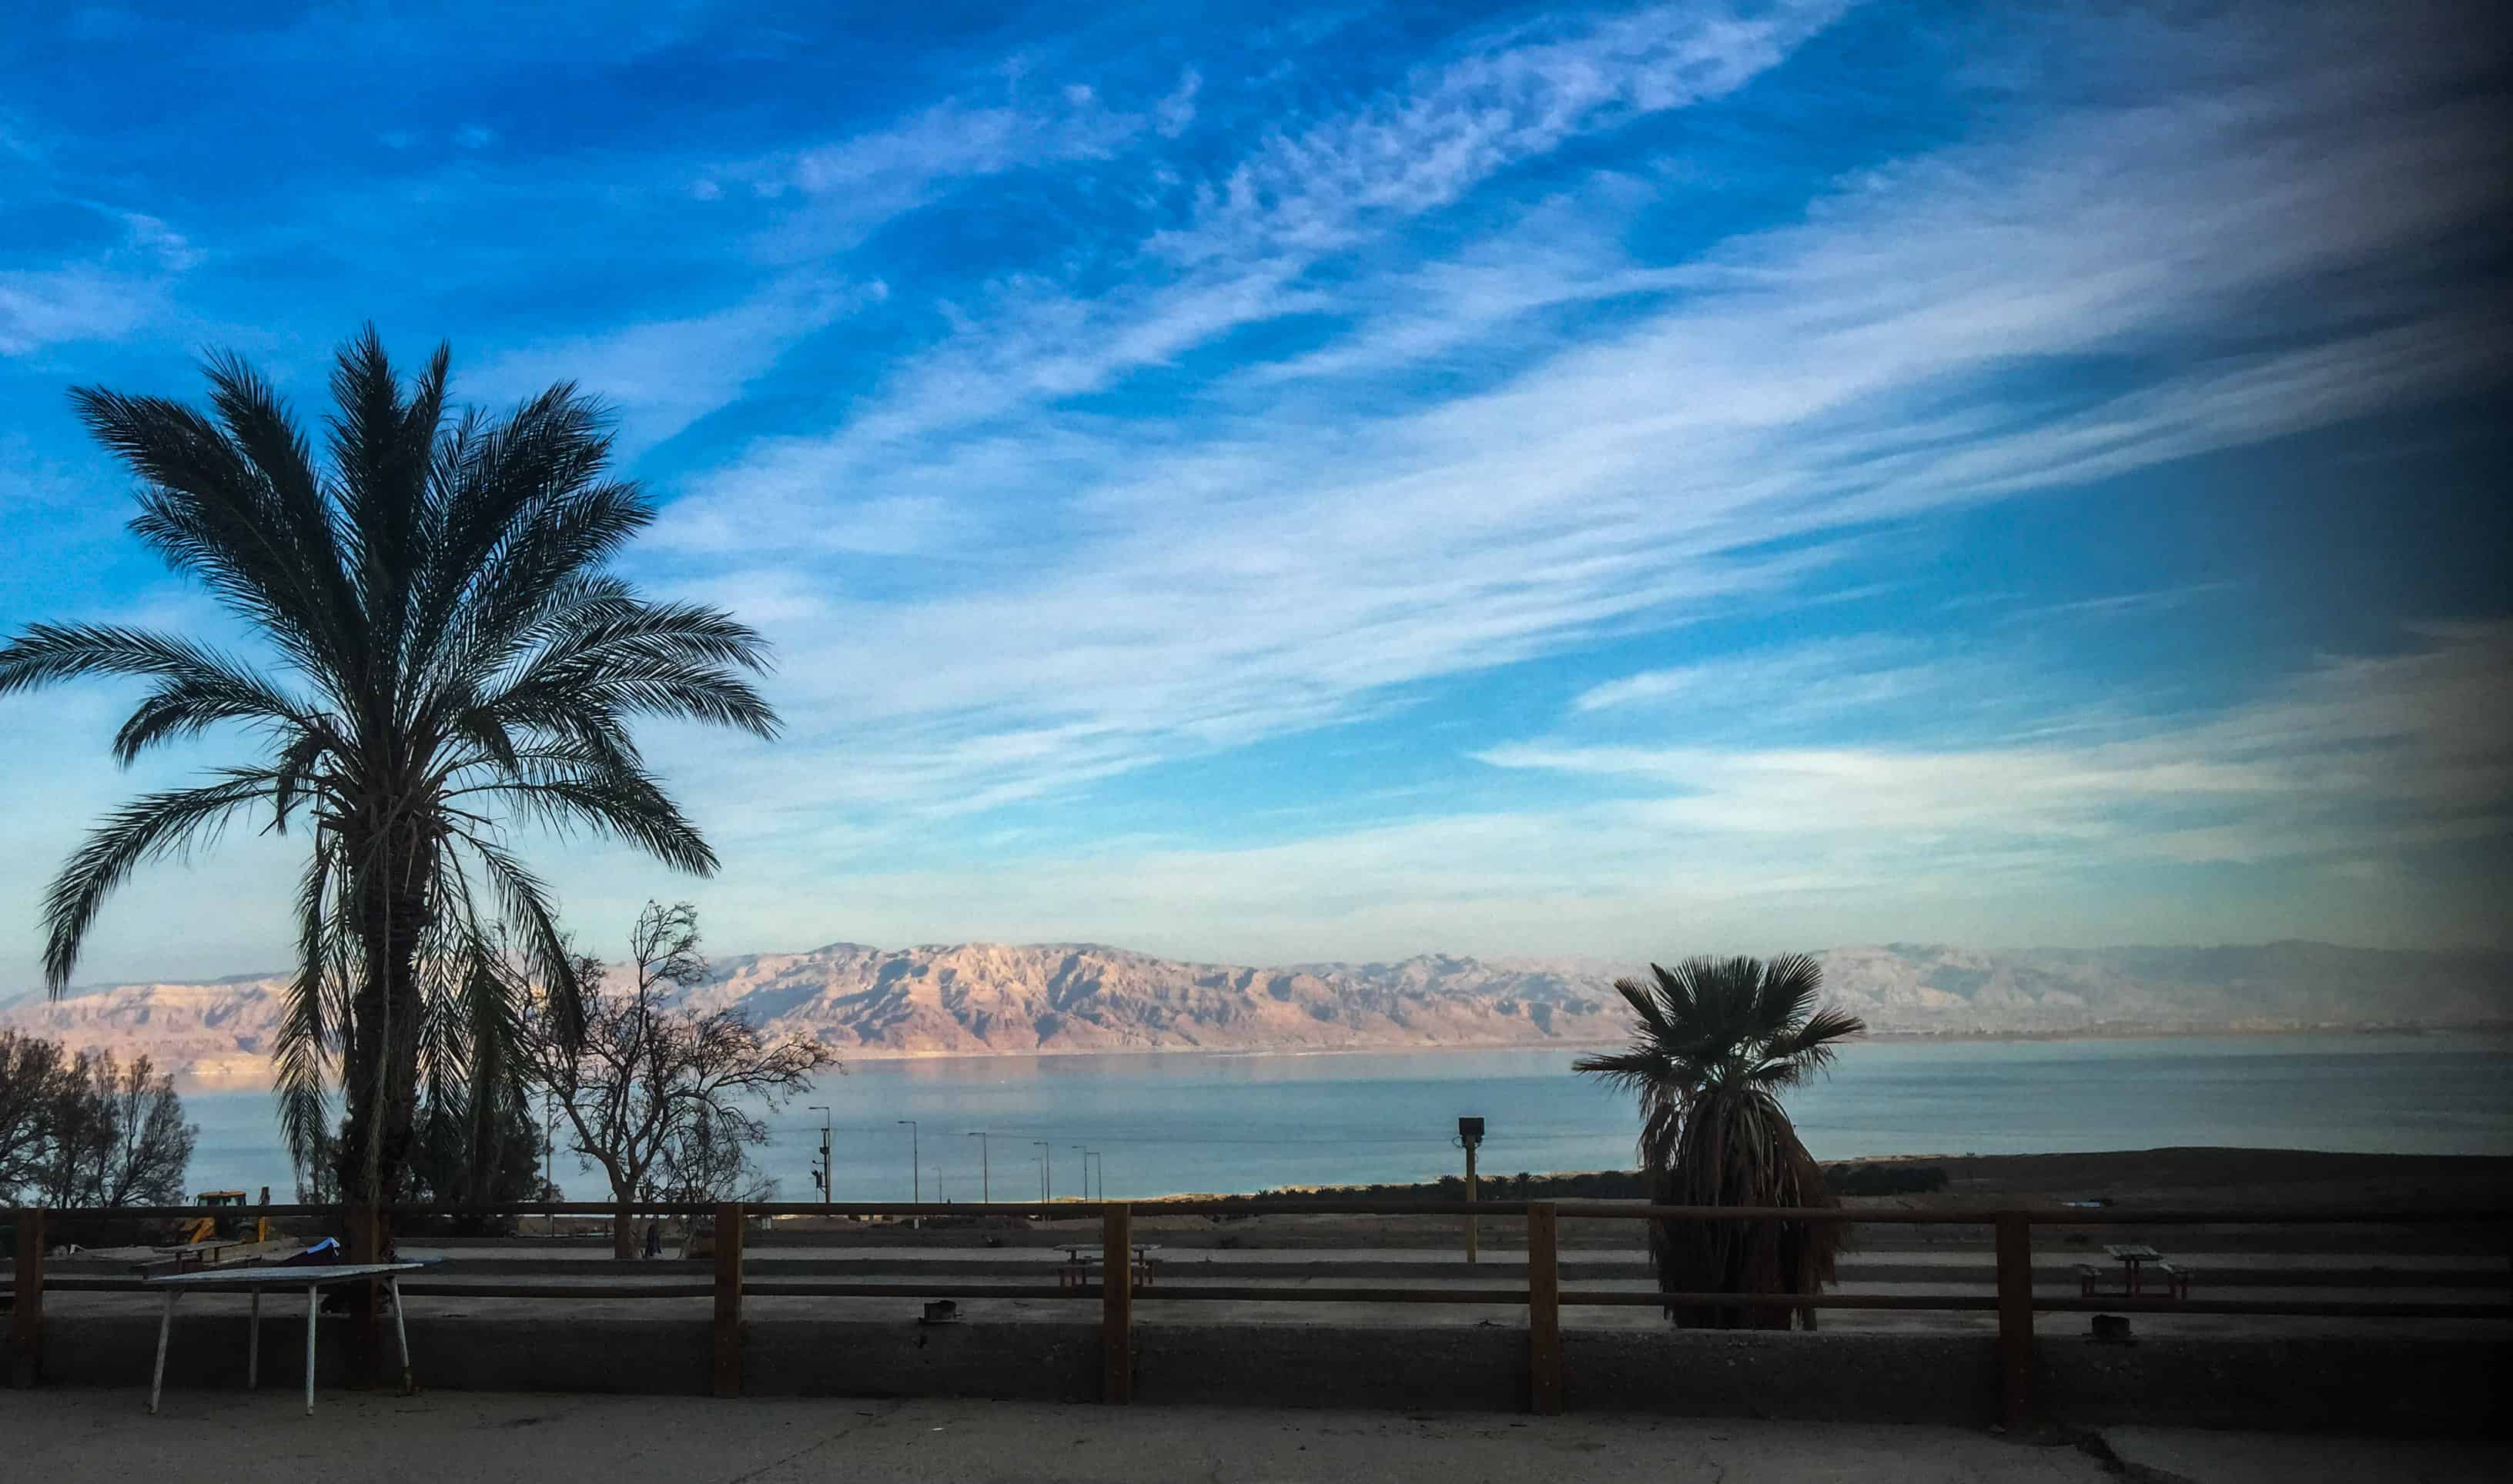 Ein Gedi camp with vies to the Dead Sea